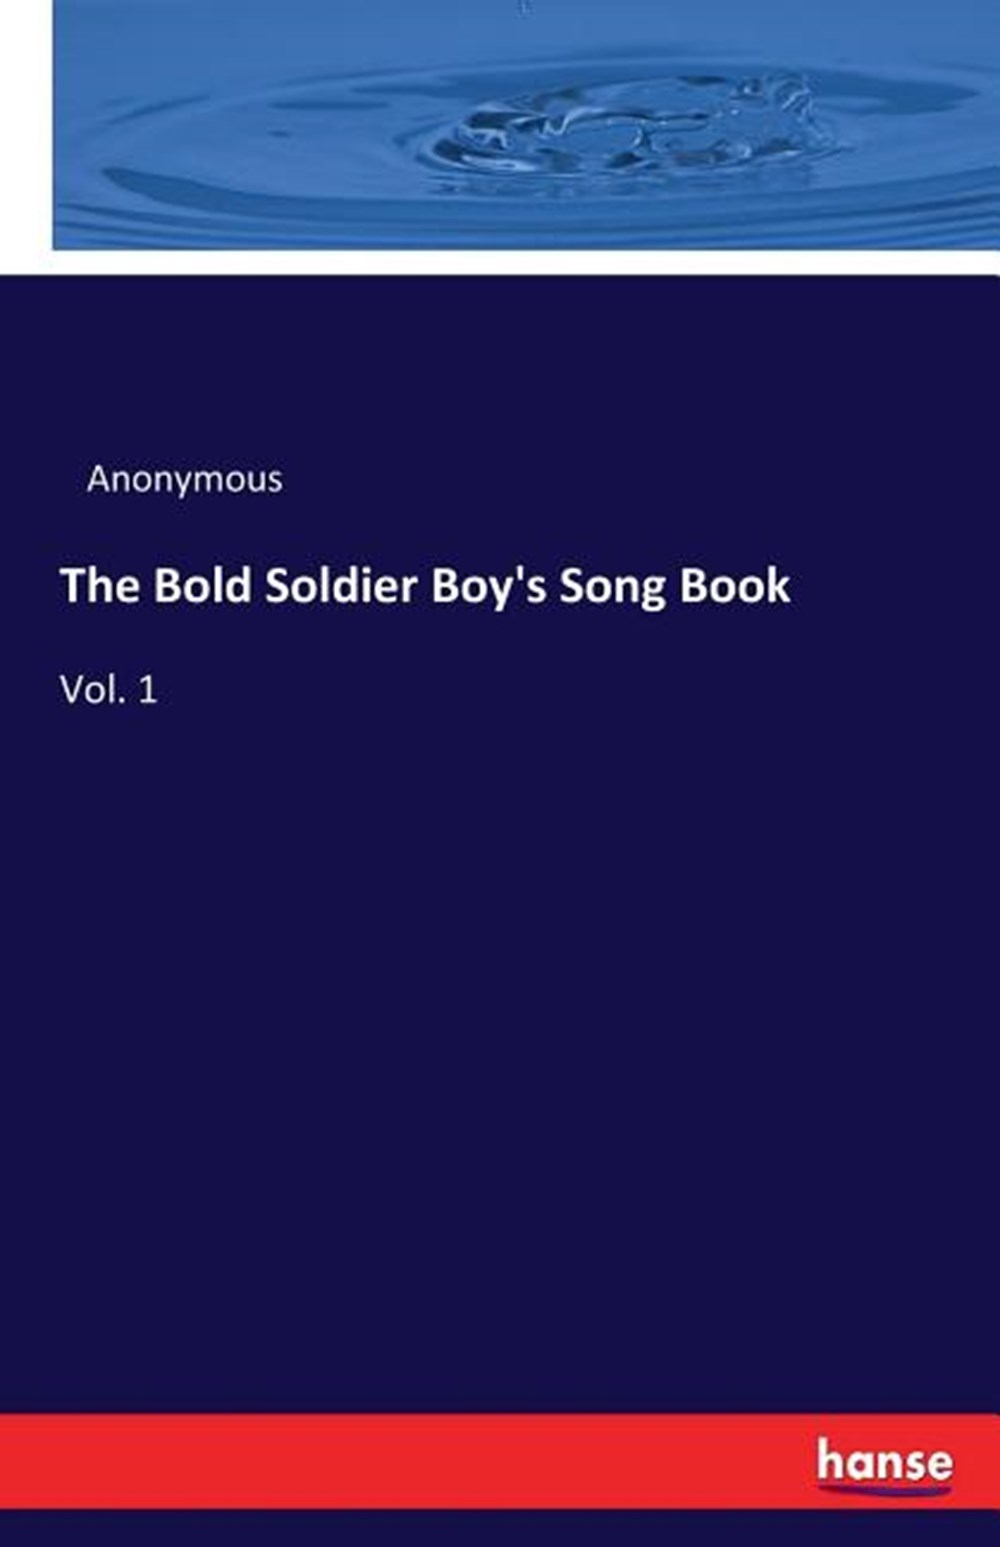 Bold Soldier Boy's Song Book Vol. 1